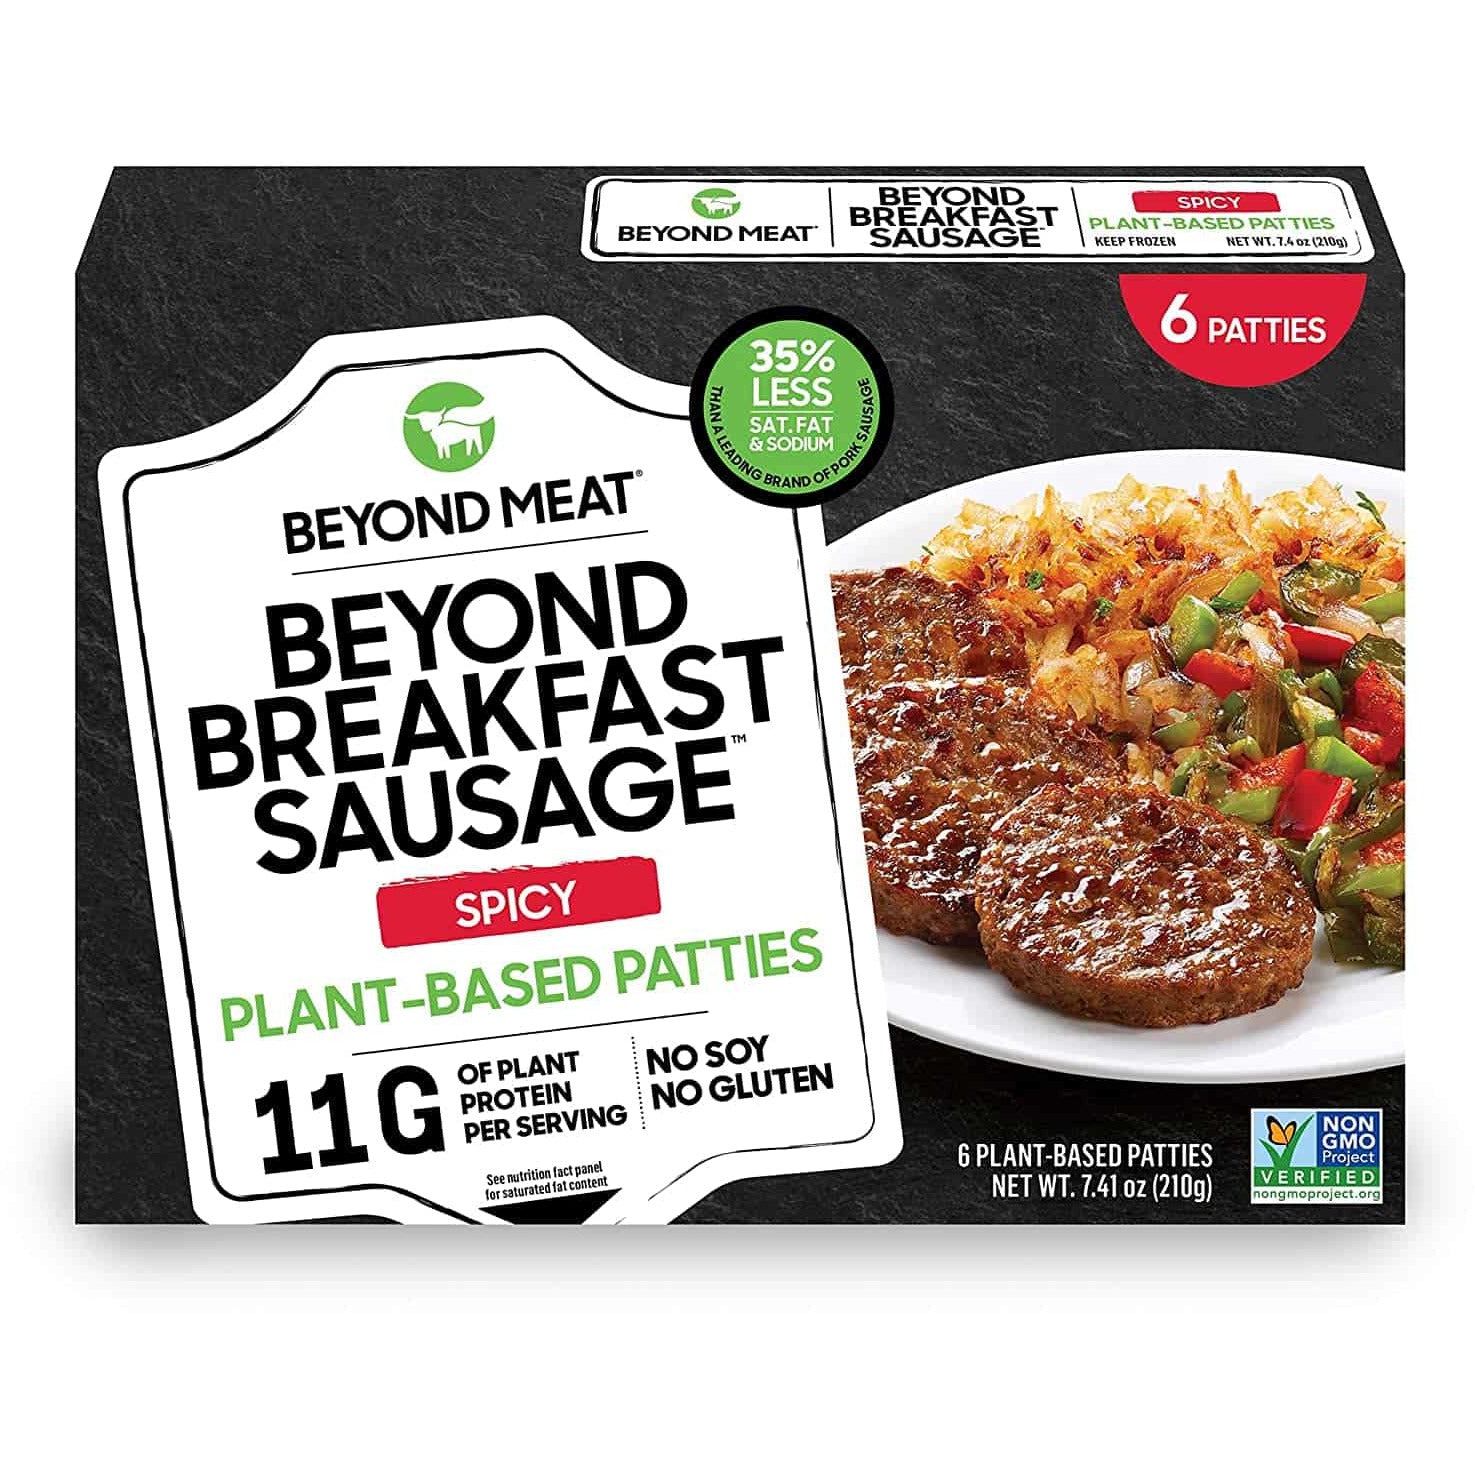 Beyond Breakfast Sausage from Beyond Meat, Plant-Based Patties, Frozen, 6 Patties per 7.4 oz Box, Spicy Flavor